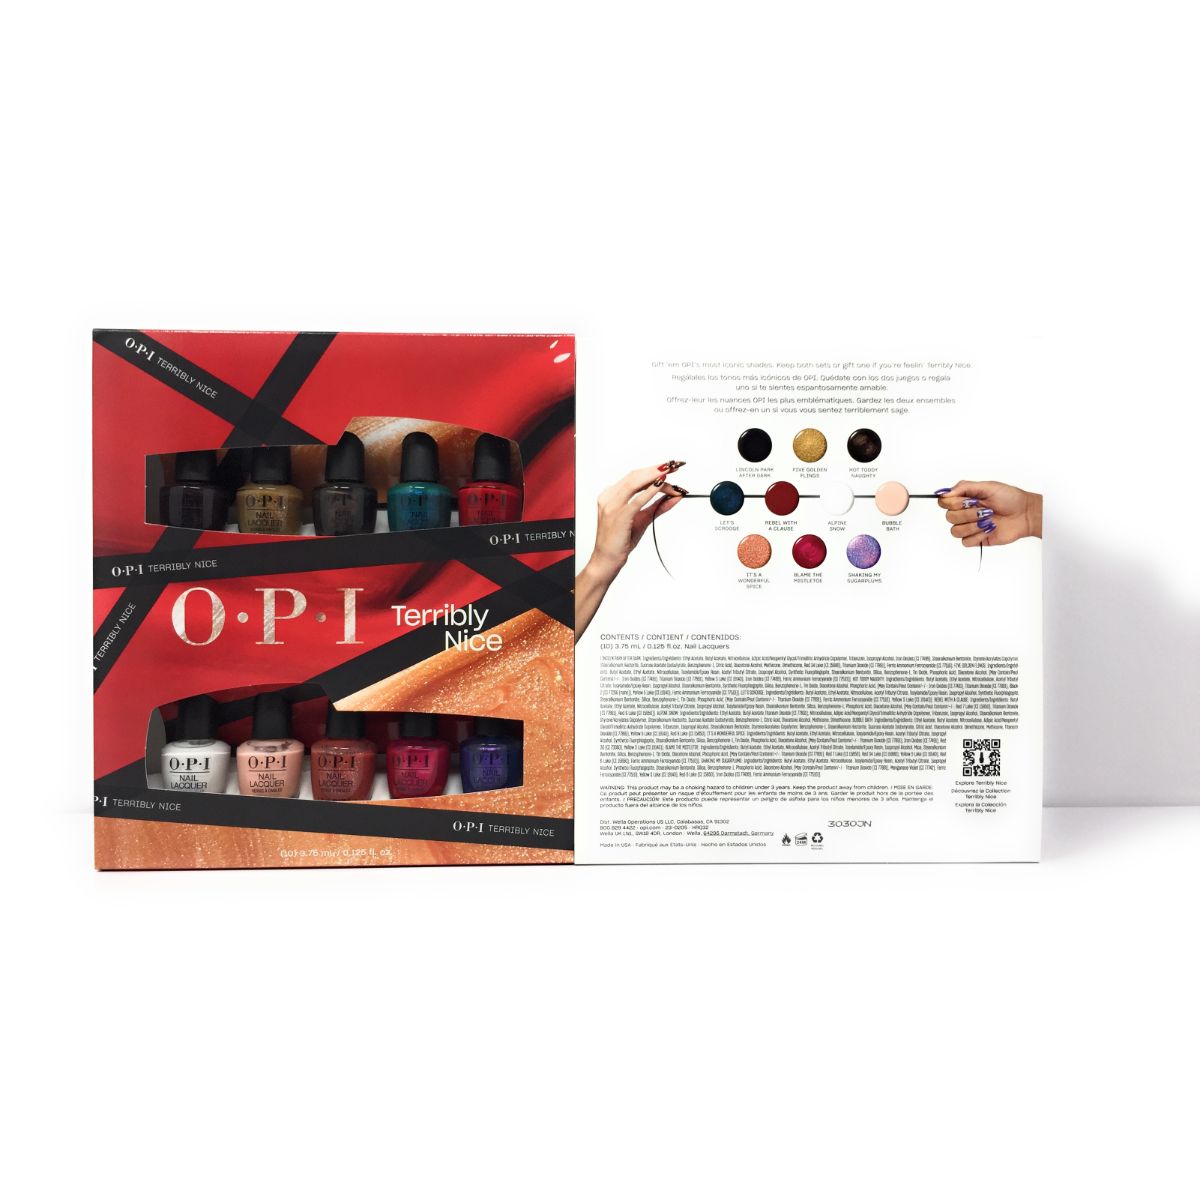 OPI Terribly Nice Nail Lacquer Mini 10 Piece Stocking Stuffer, Holiday Polish Gifts - image 4 of 4